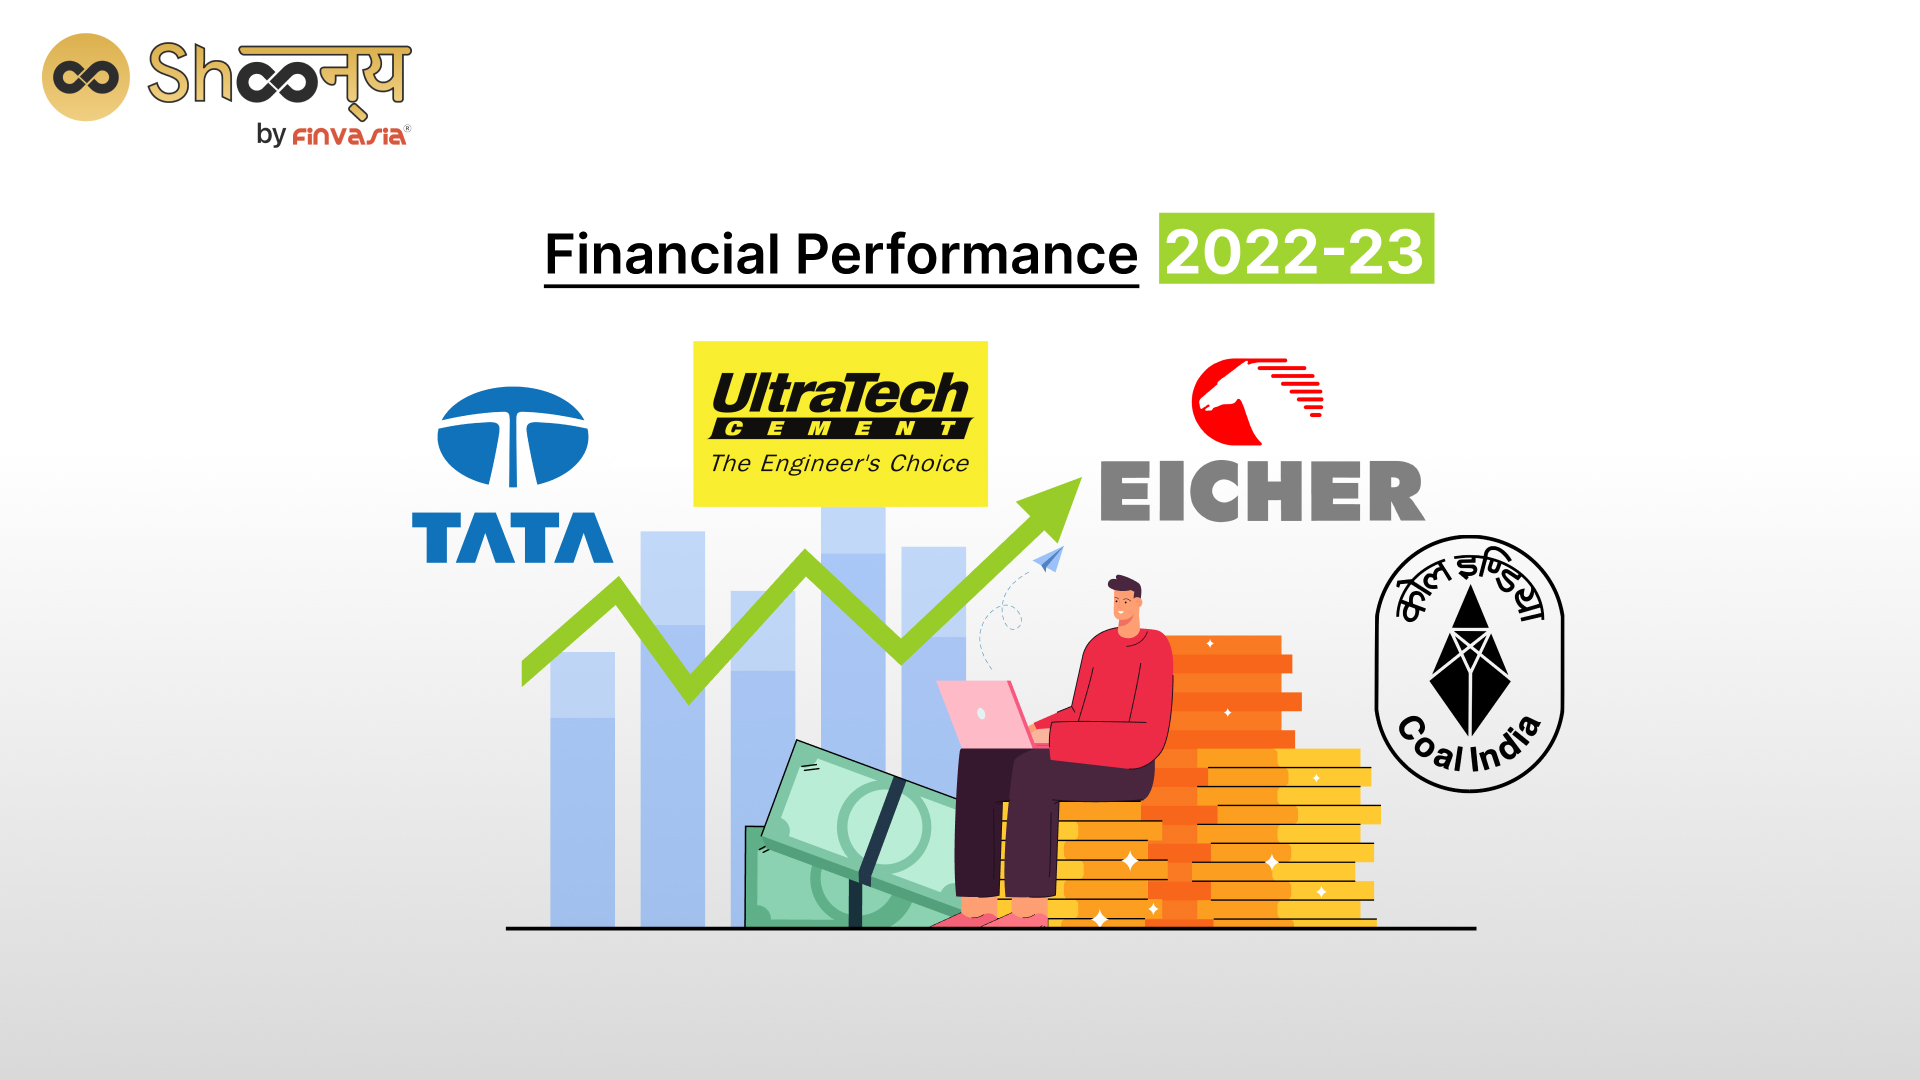 FY 22-23 Growth: UltraTech, Coal India, Tata Motors, and More.